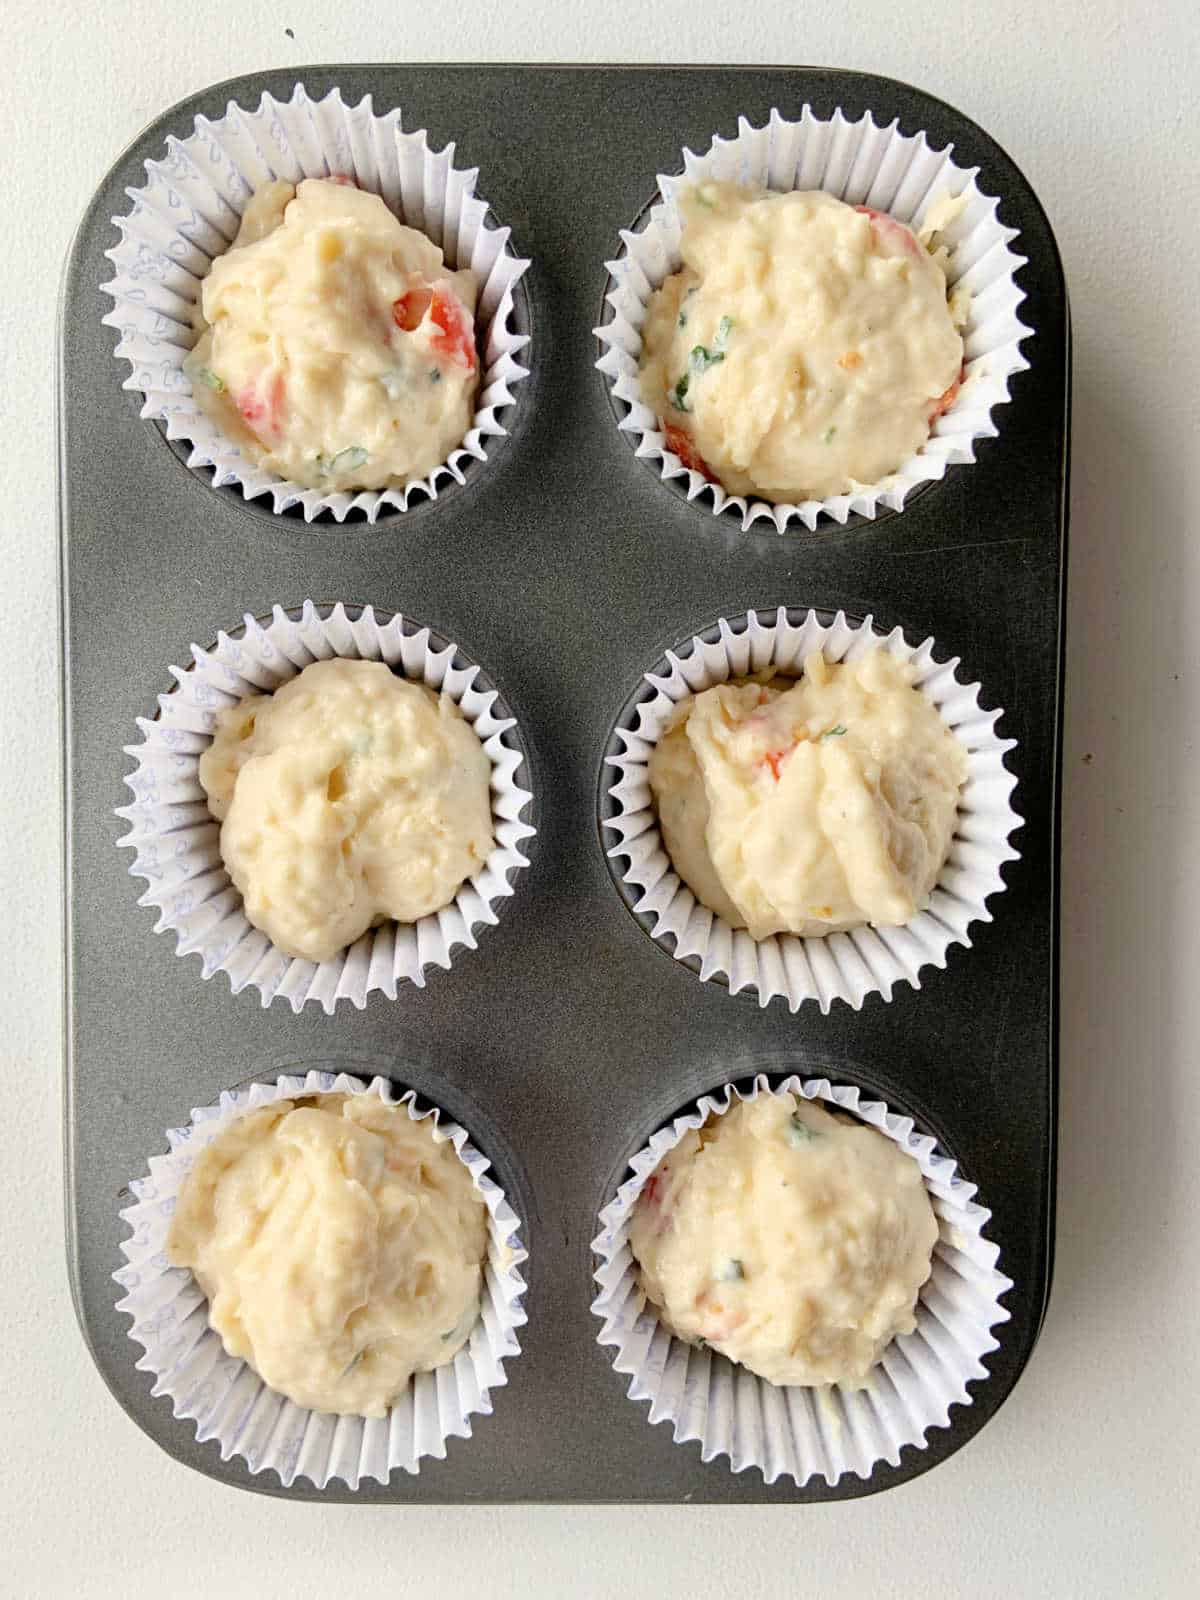 Muffin liners with savory cheese tomato batter in a metal pan on a white surface.